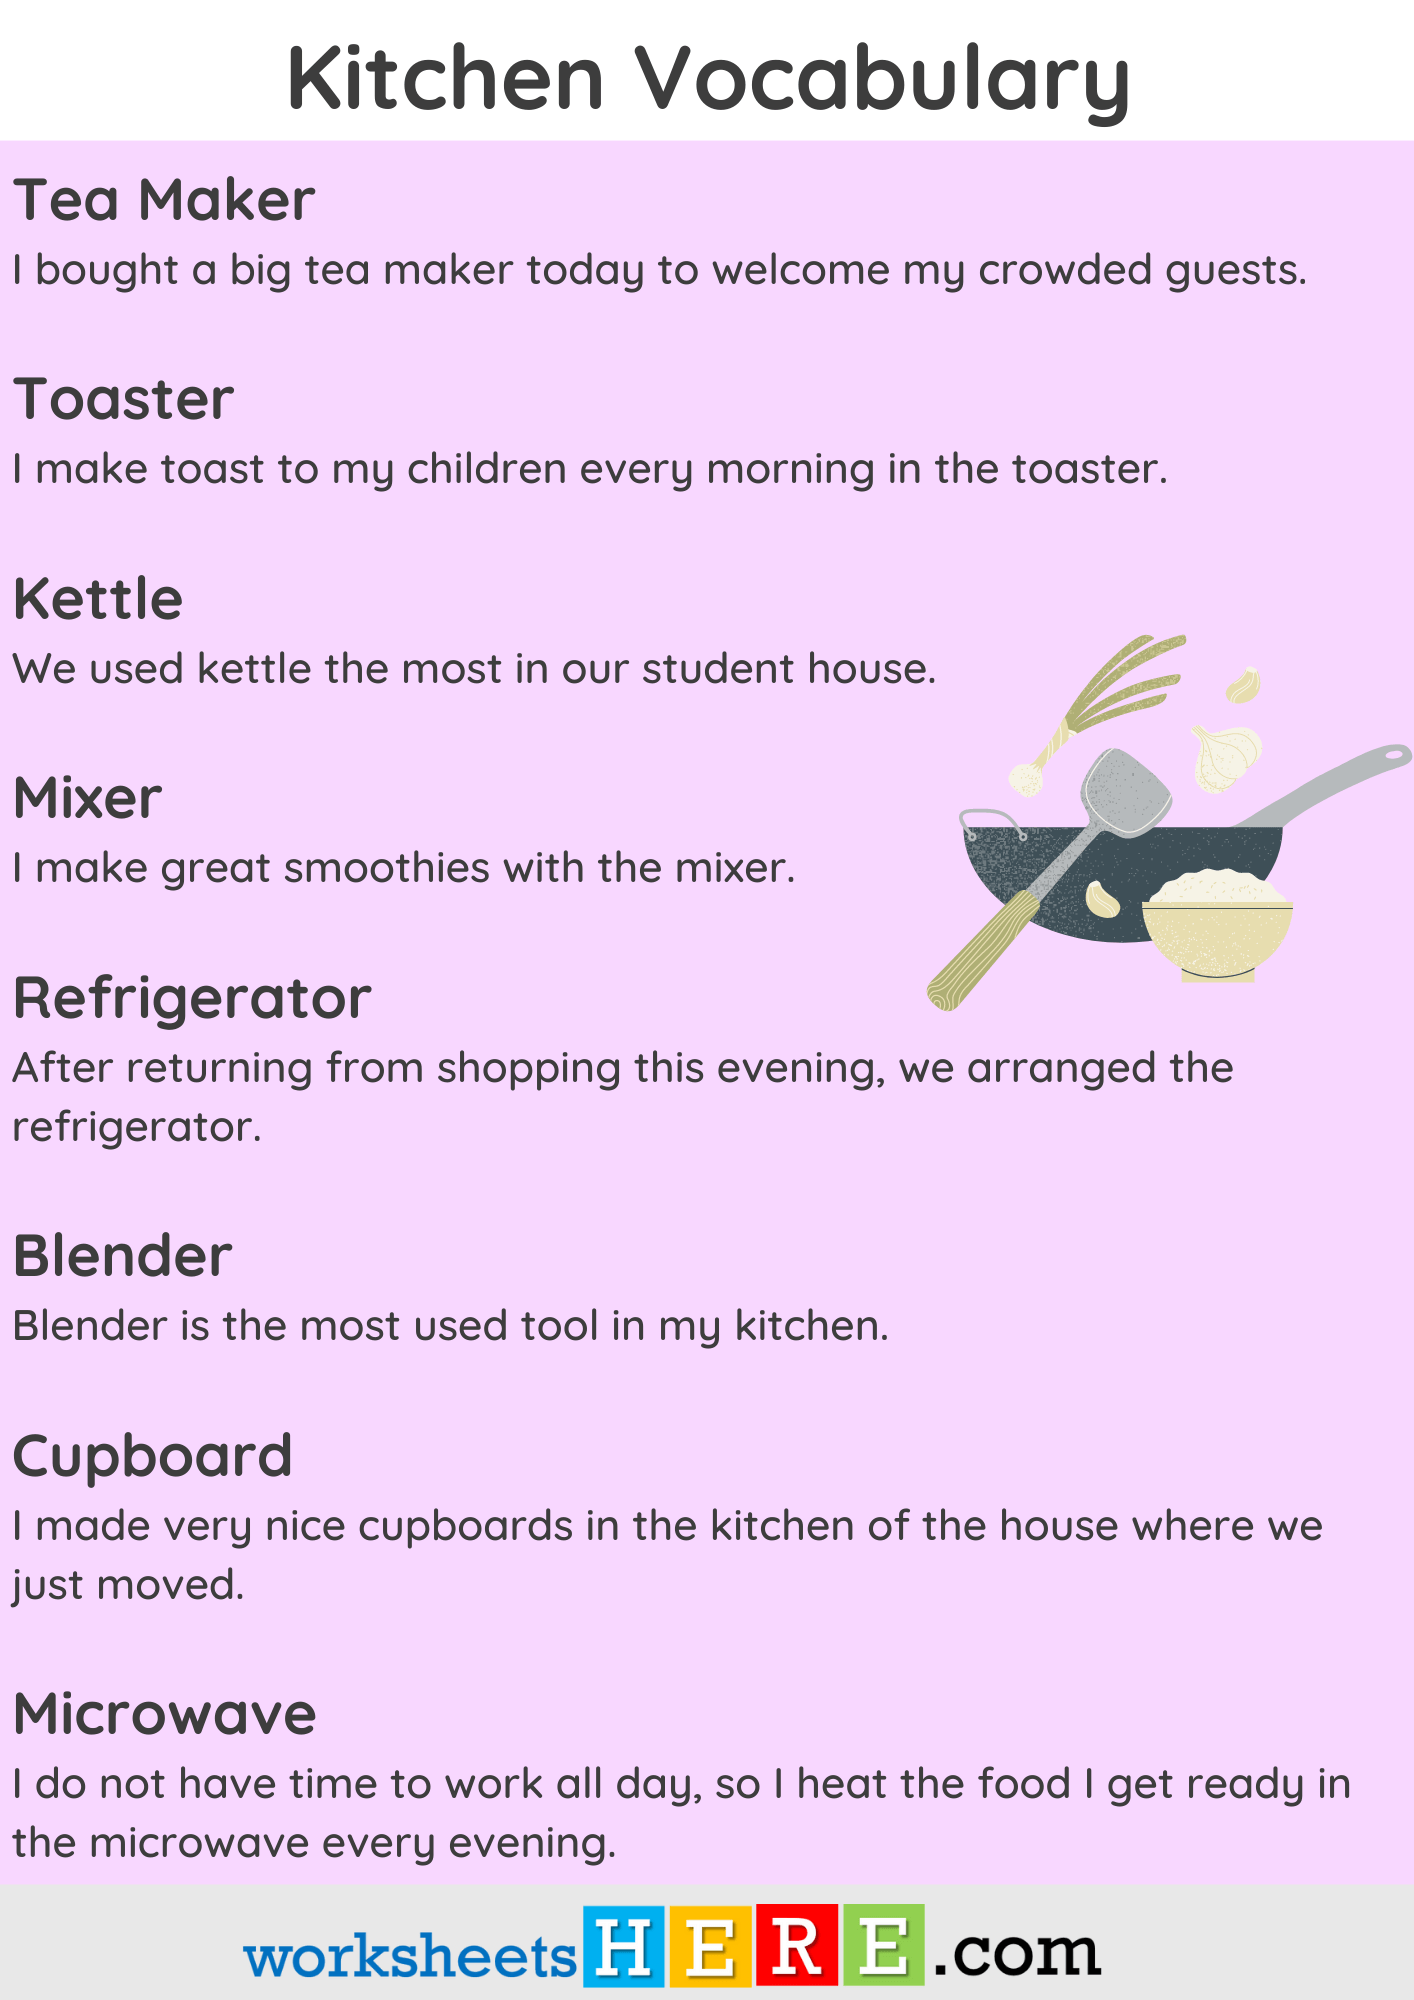 Kitchen Vocabulary and Example Sentences PDF Worksheet For Students